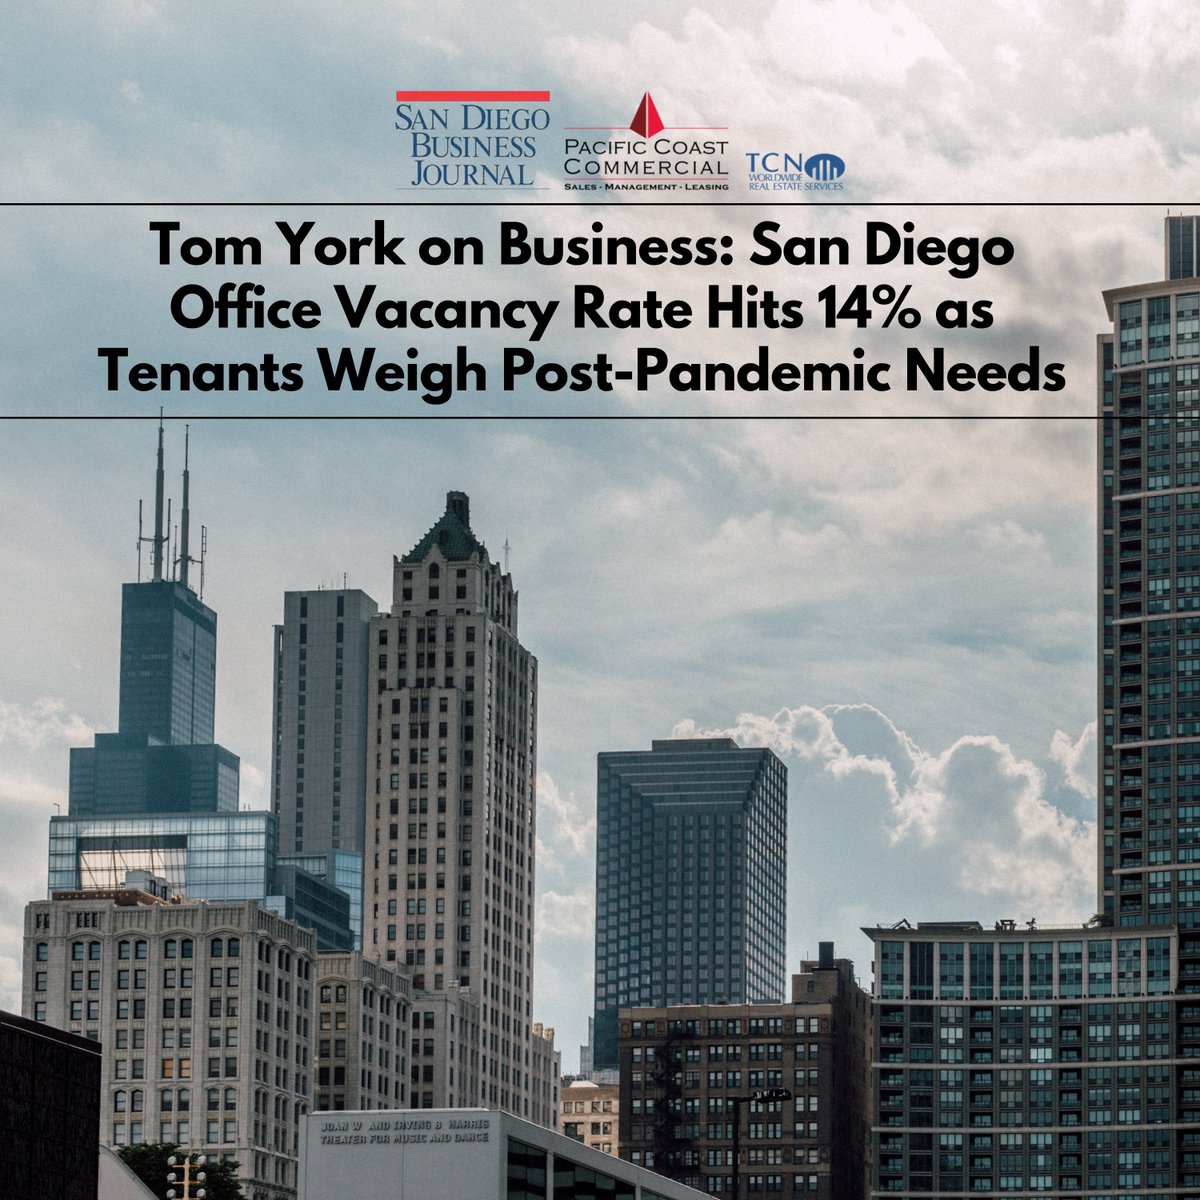 San Diego's office vacancy rate hits 14% as businesses navigate post-pandemic needs. With leasing activity slowing, tenants are reevaluating their real estate footprints amidst changing work dynamics.

bit.ly/3UxkoKm

#sandiego #businesstrends #realestate #postpandemic